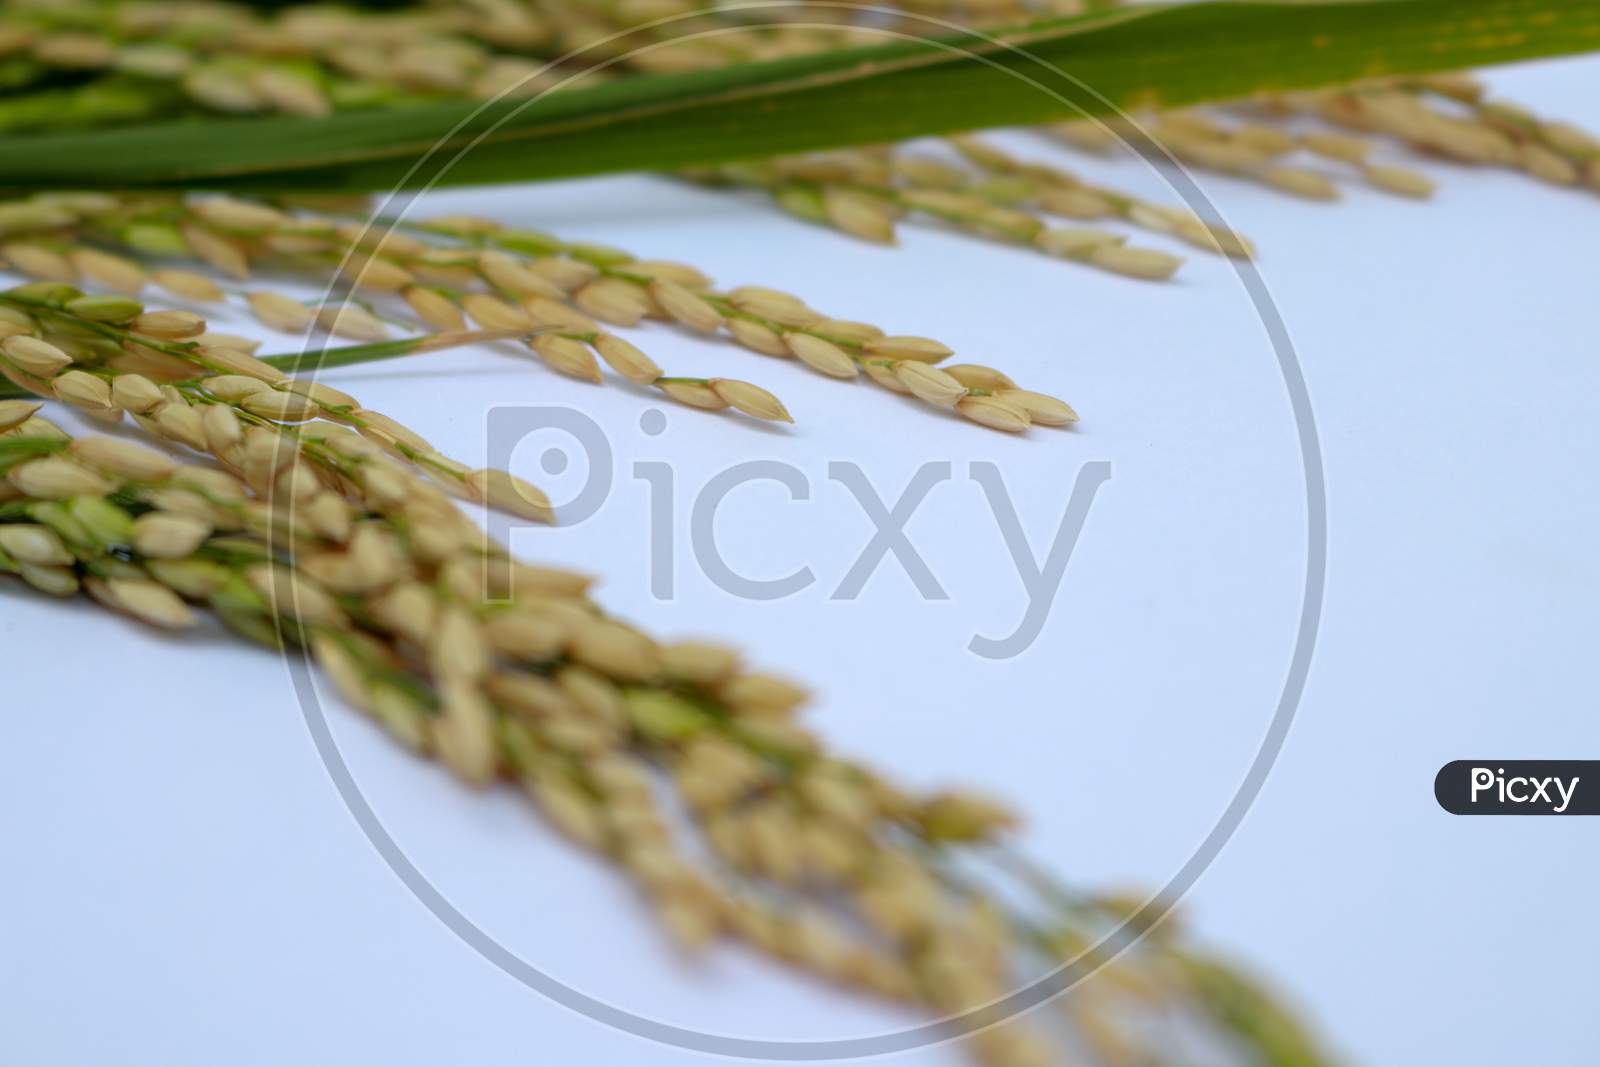 Organic Paddy Rice,Ear Of Paddy, Ears Of Thai Jasmine Rice Isolated On White Background